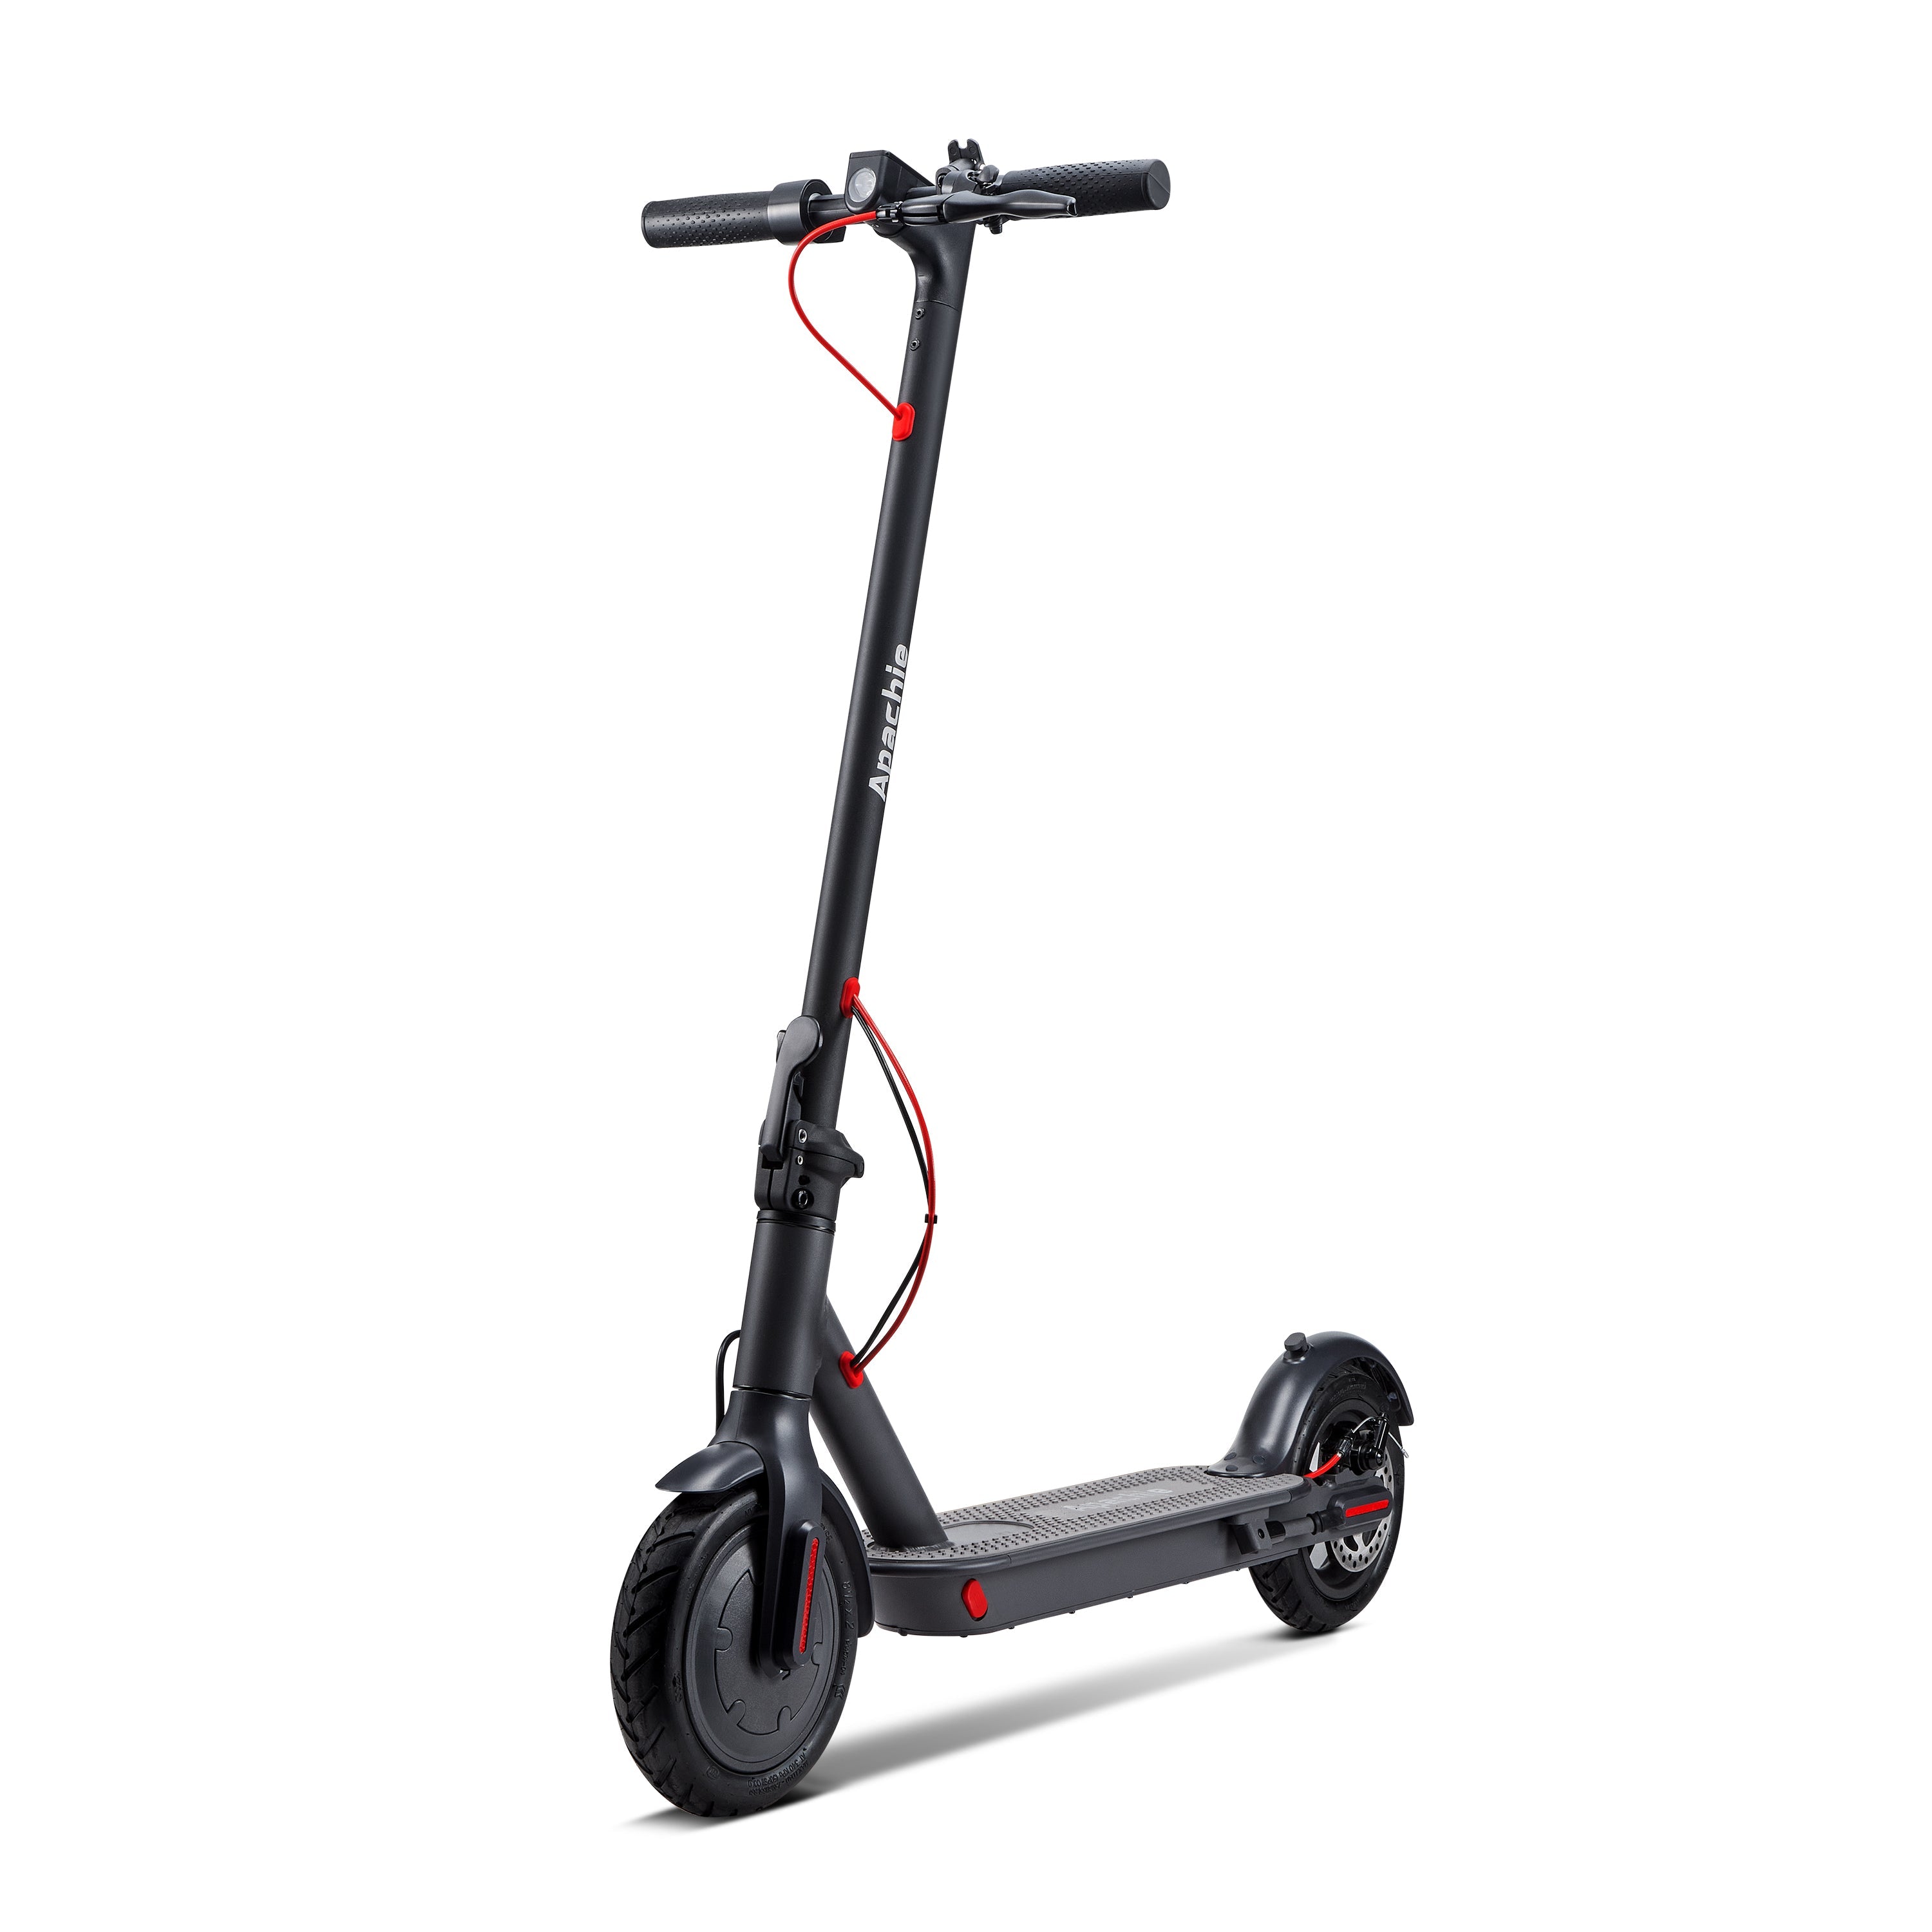 Apachie M4 350W Electric Scooter Refurbished